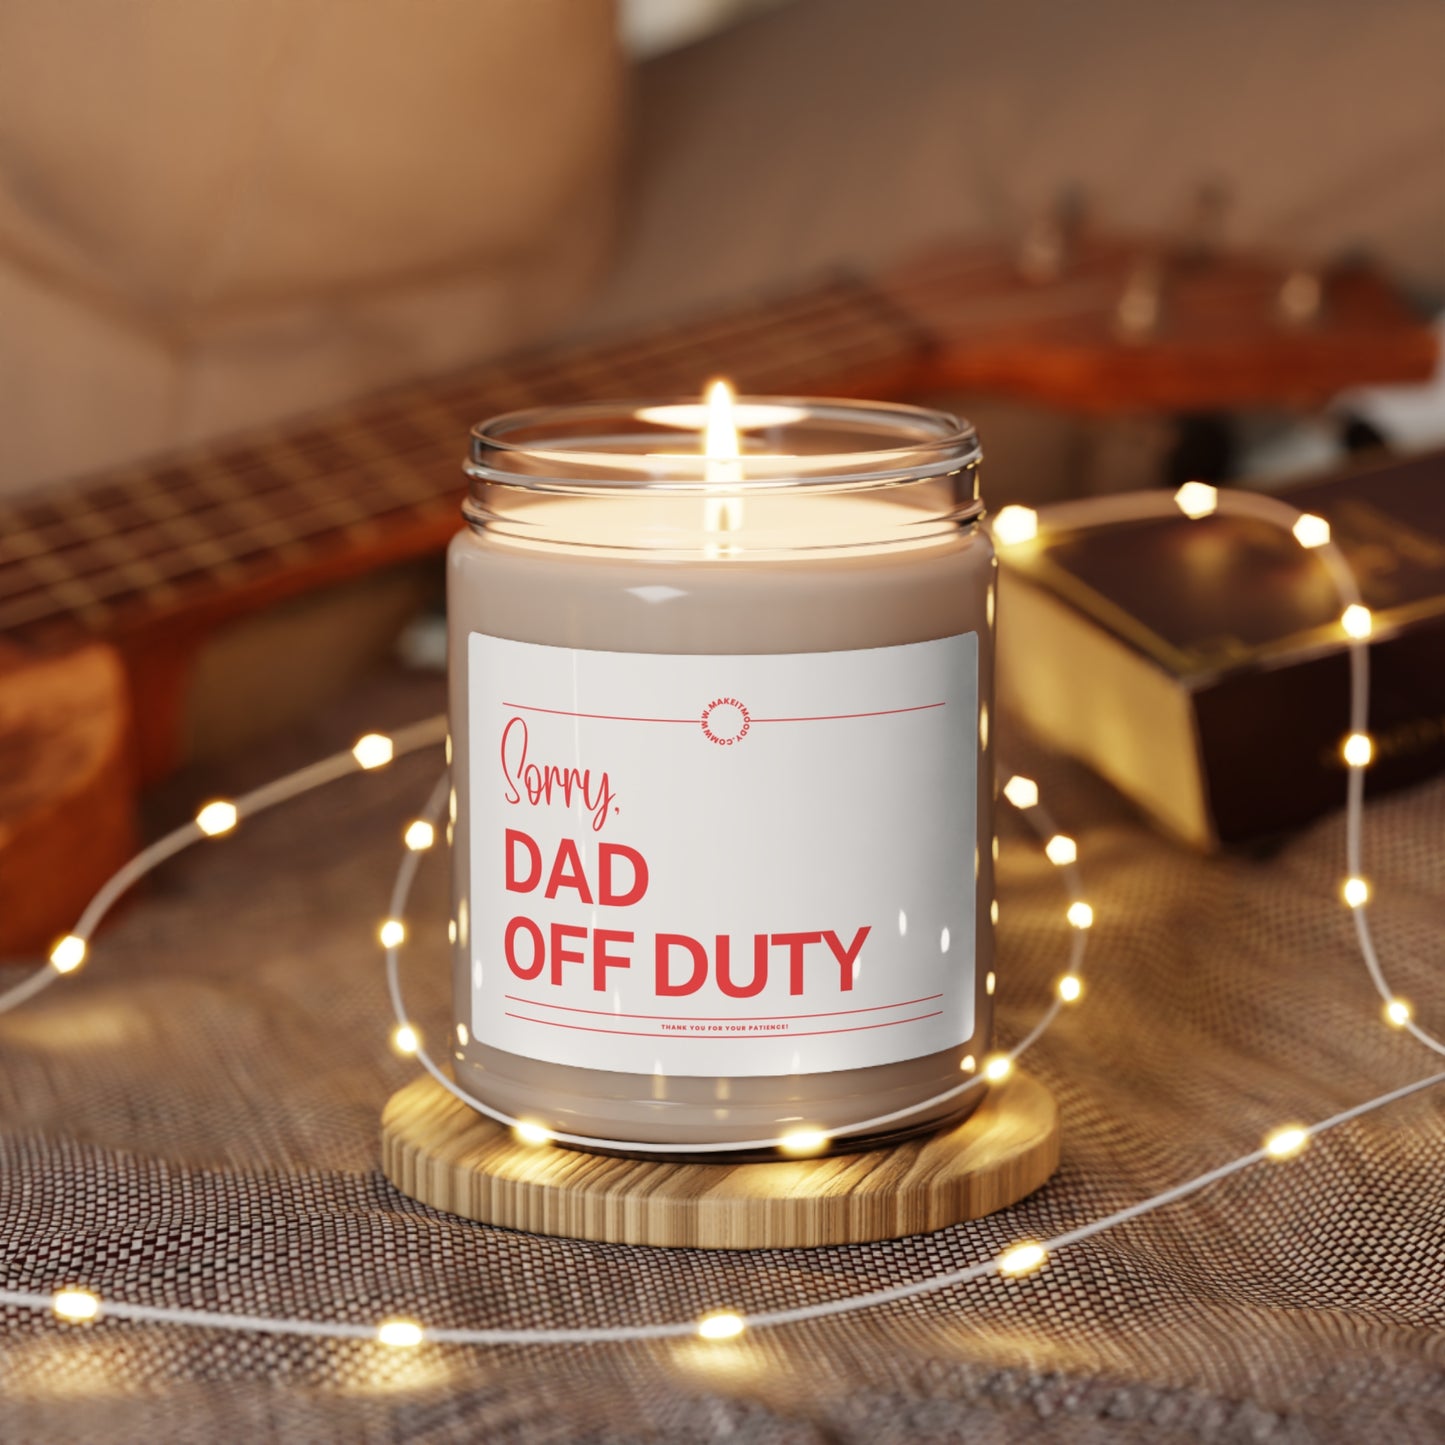 "Sorry, Dad Off Duty" Scented Soy Candle, 9oz